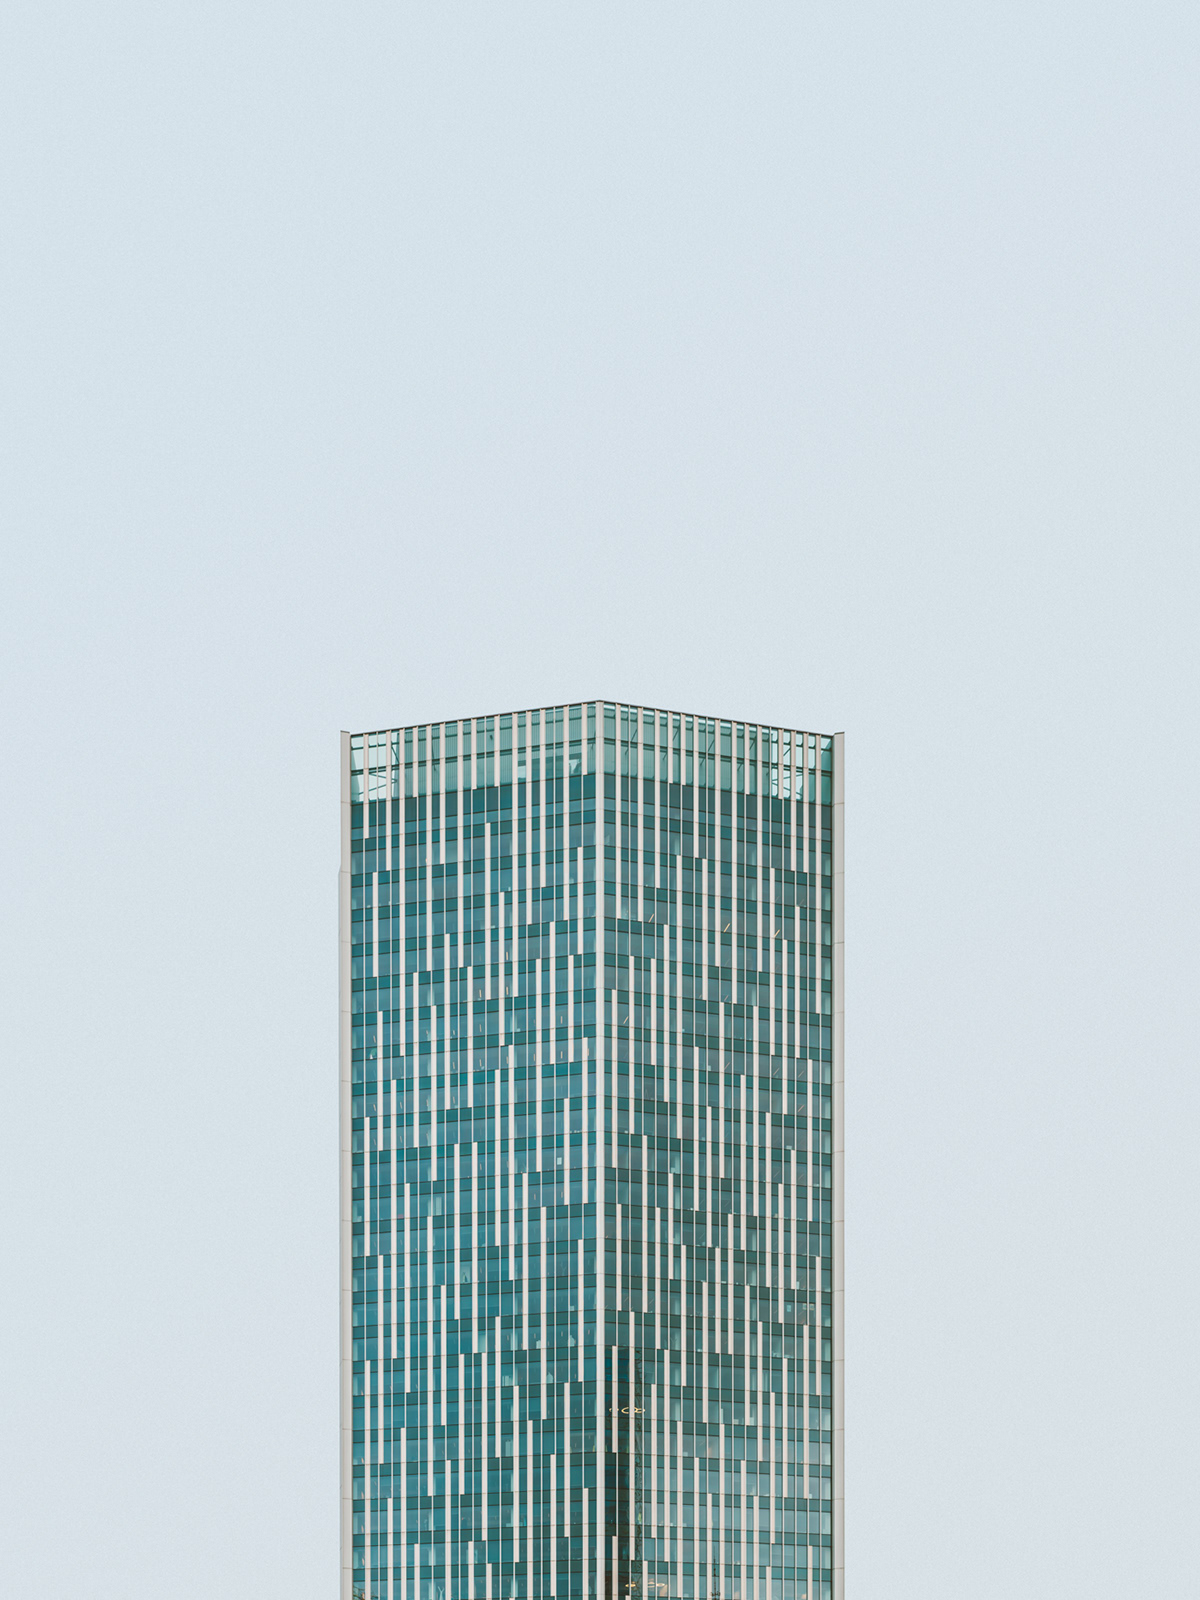 buildings Minimalism architecture Urban tower highrise SKY